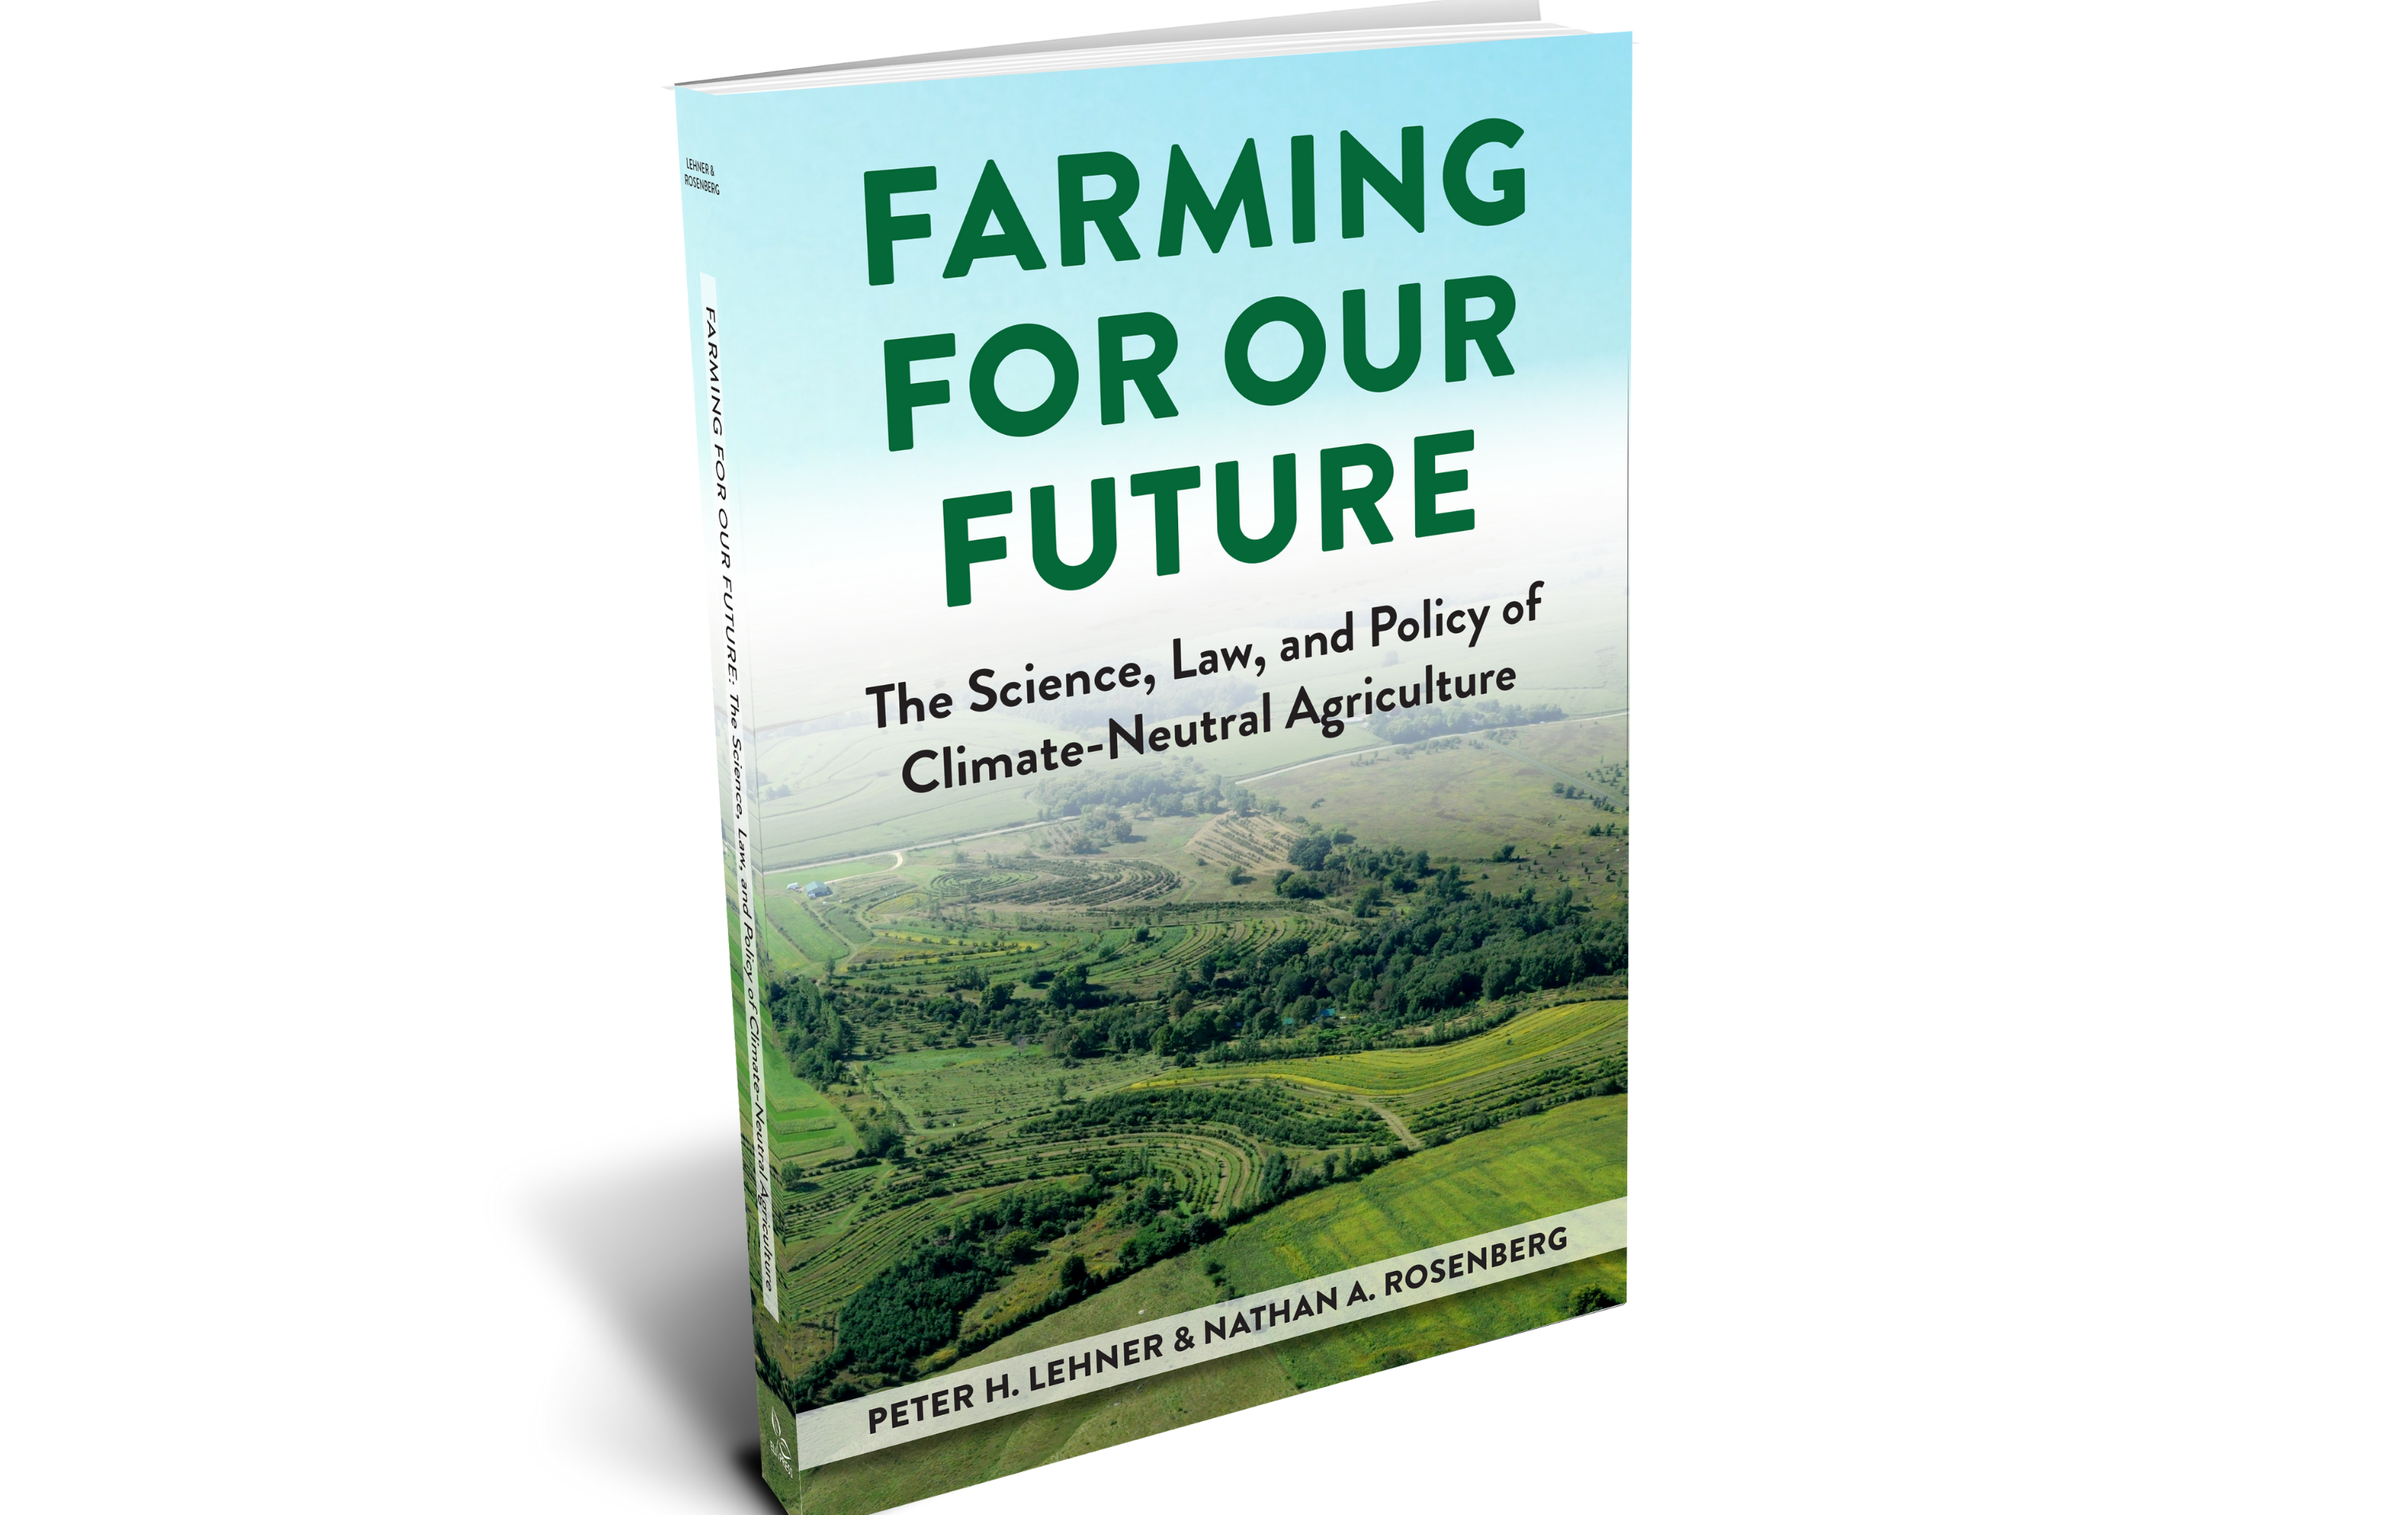 Picture of Farming for our Future book cover.